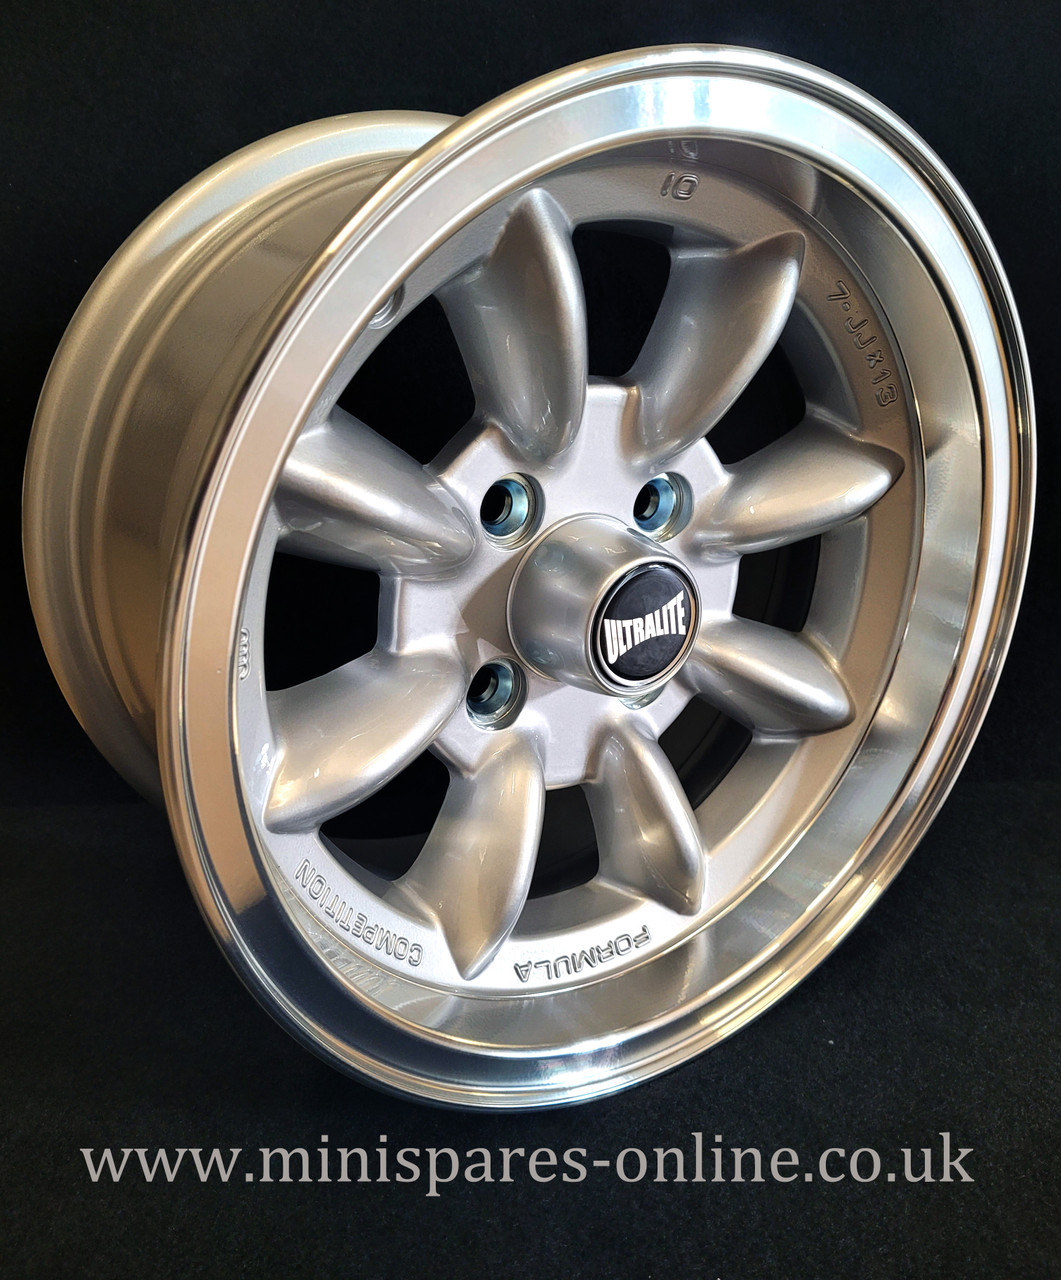 7x13 Silver (Polished Rim) Ultralite Alloy Wheel Rim or Package for Classic Mini